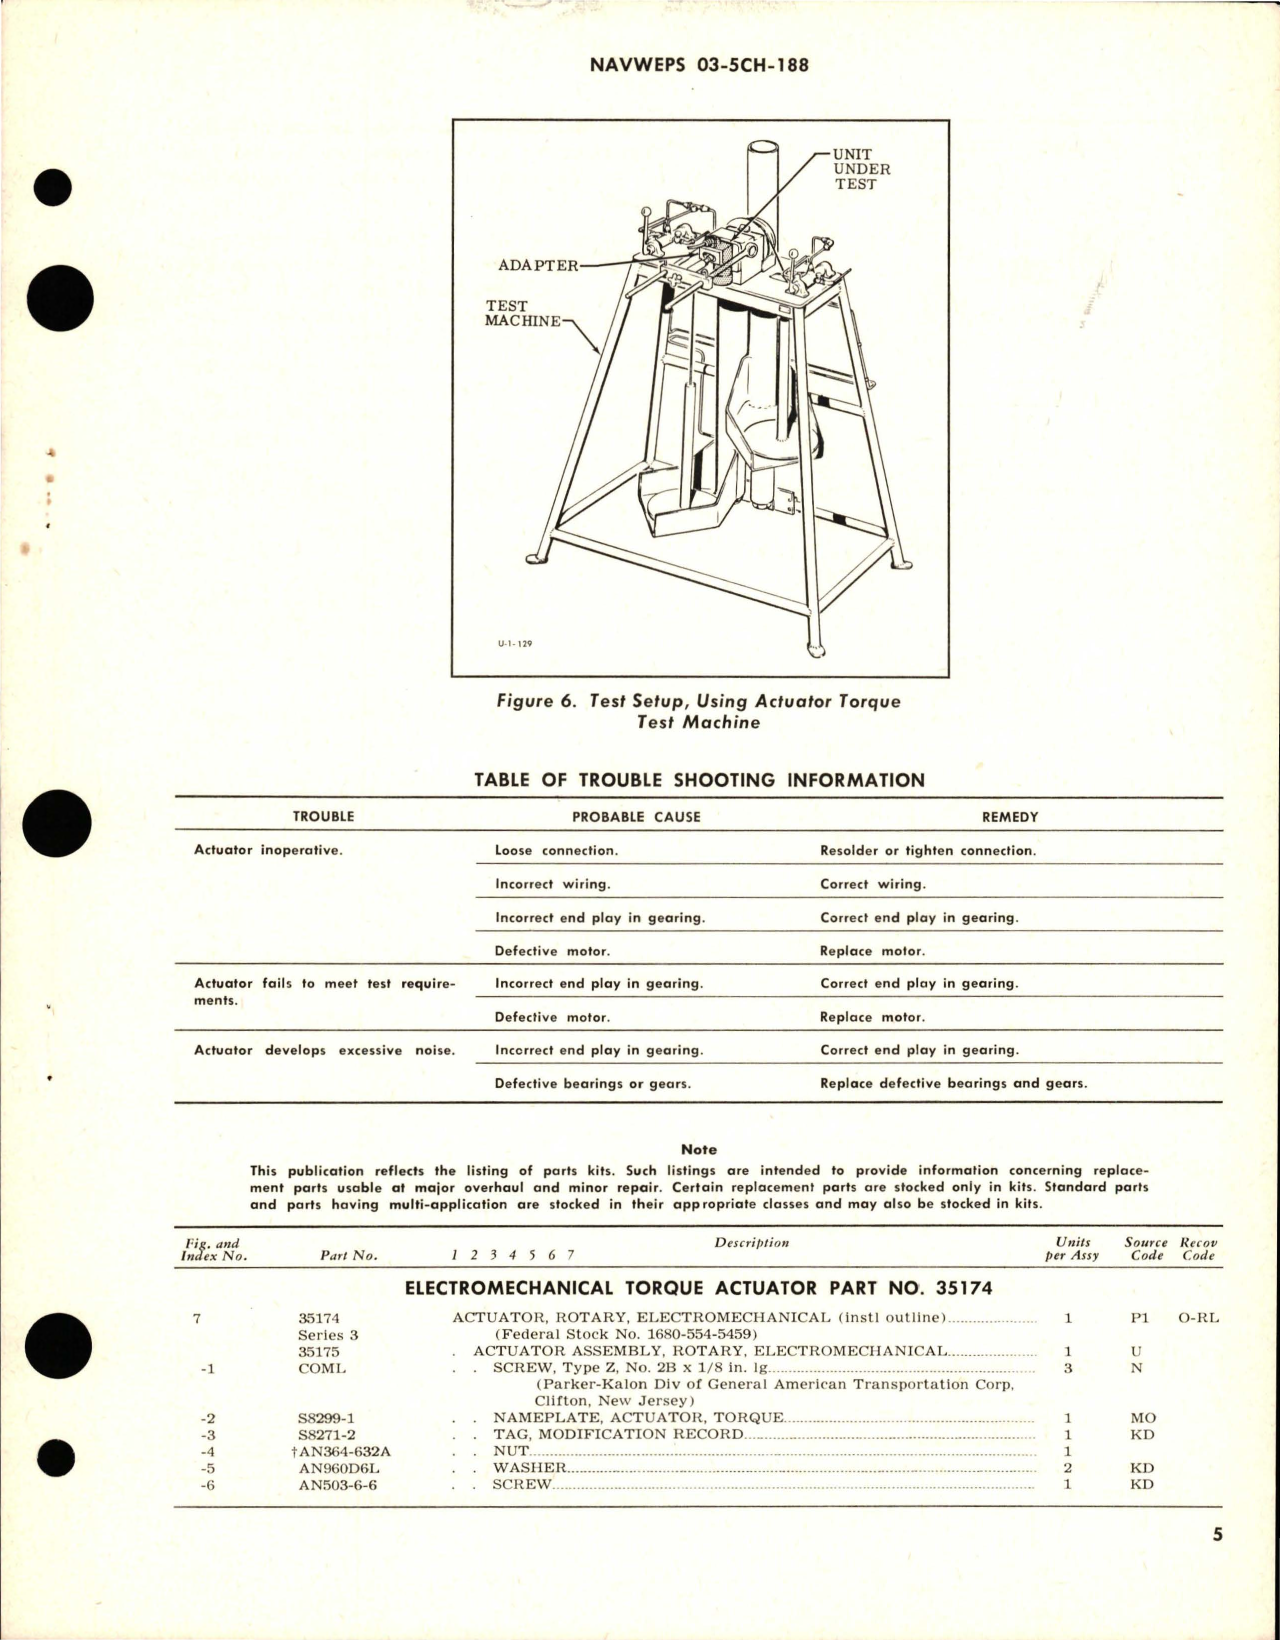 Sample page 5 from AirCorps Library document: Overhaul Instructions with Parts Breakdown for Electromechanical Torque Actuator - Part 35174